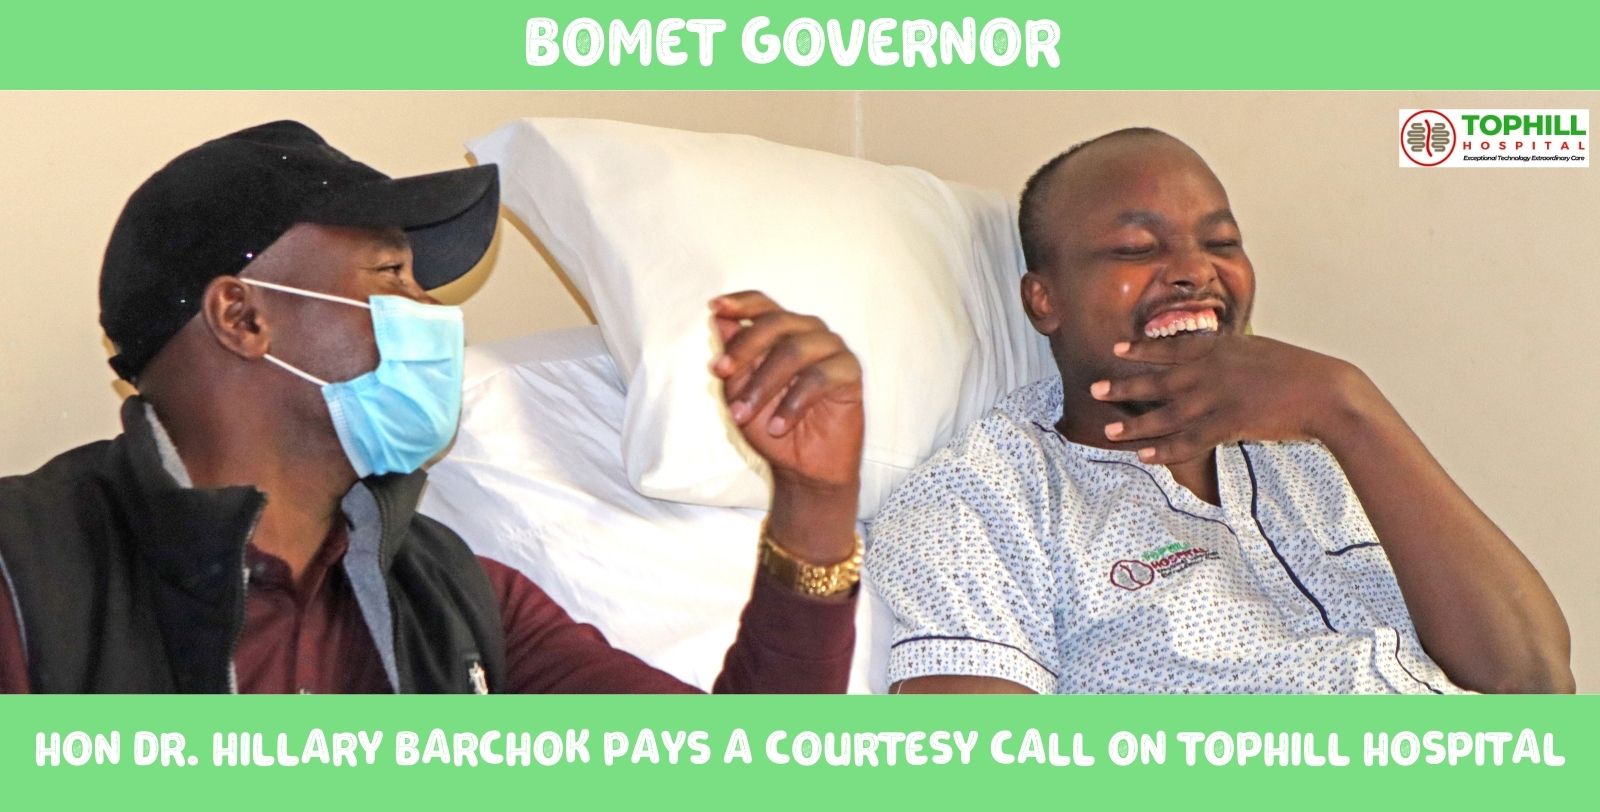 Bomet Governor Hon Dr. Hillary Barchok pays a courtesy call on Tophill Hospital